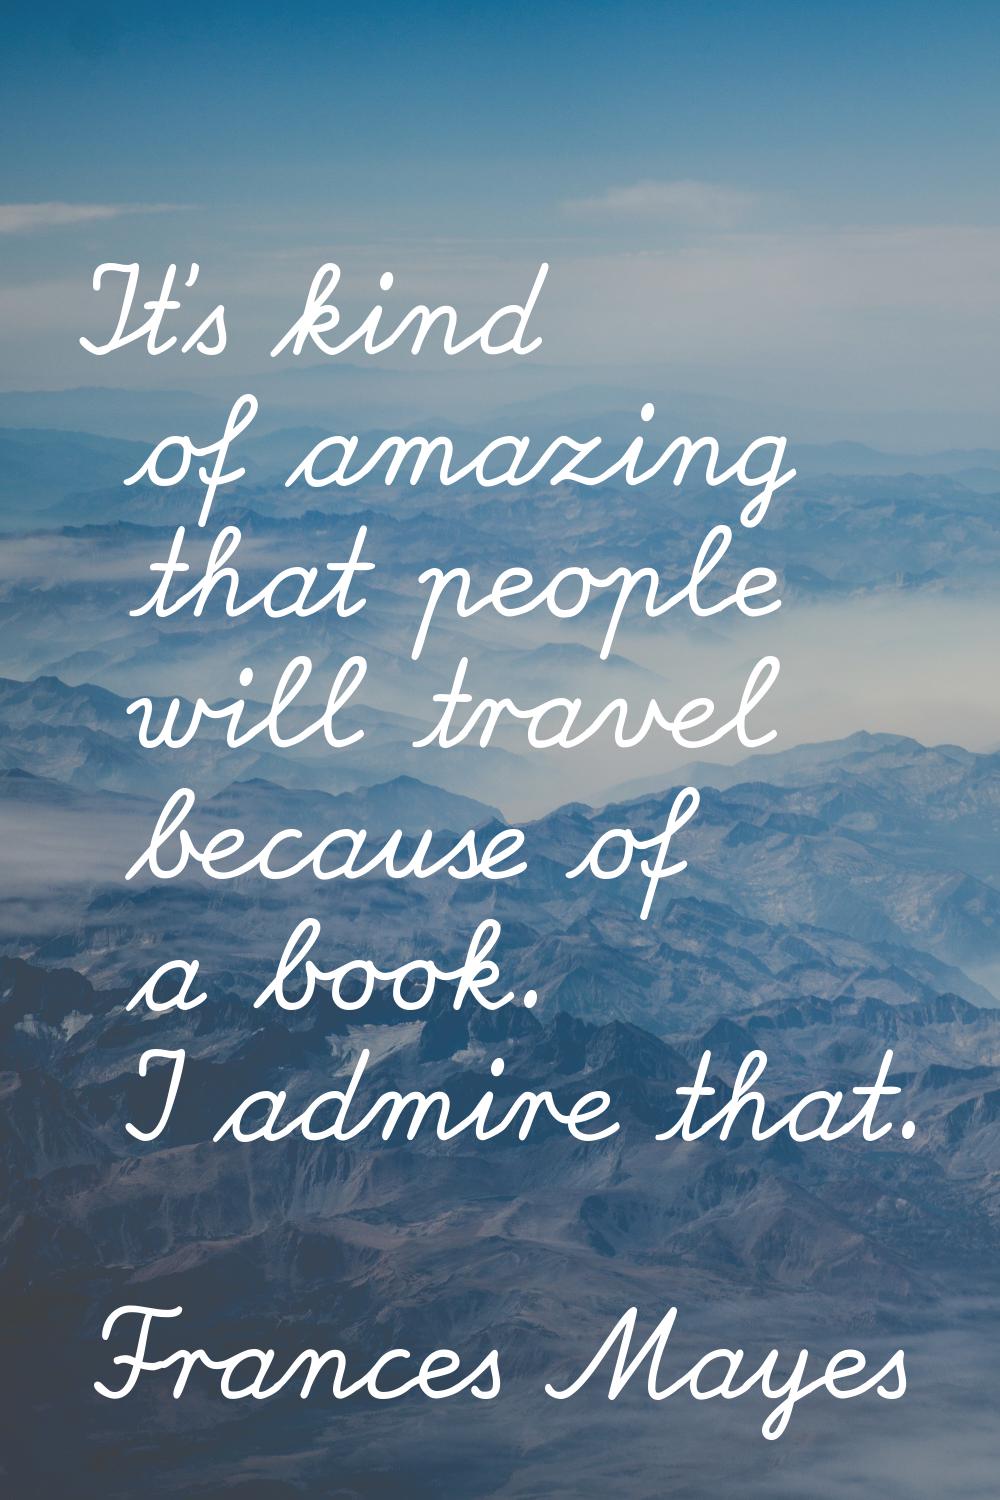 It's kind of amazing that people will travel because of a book. I admire that.